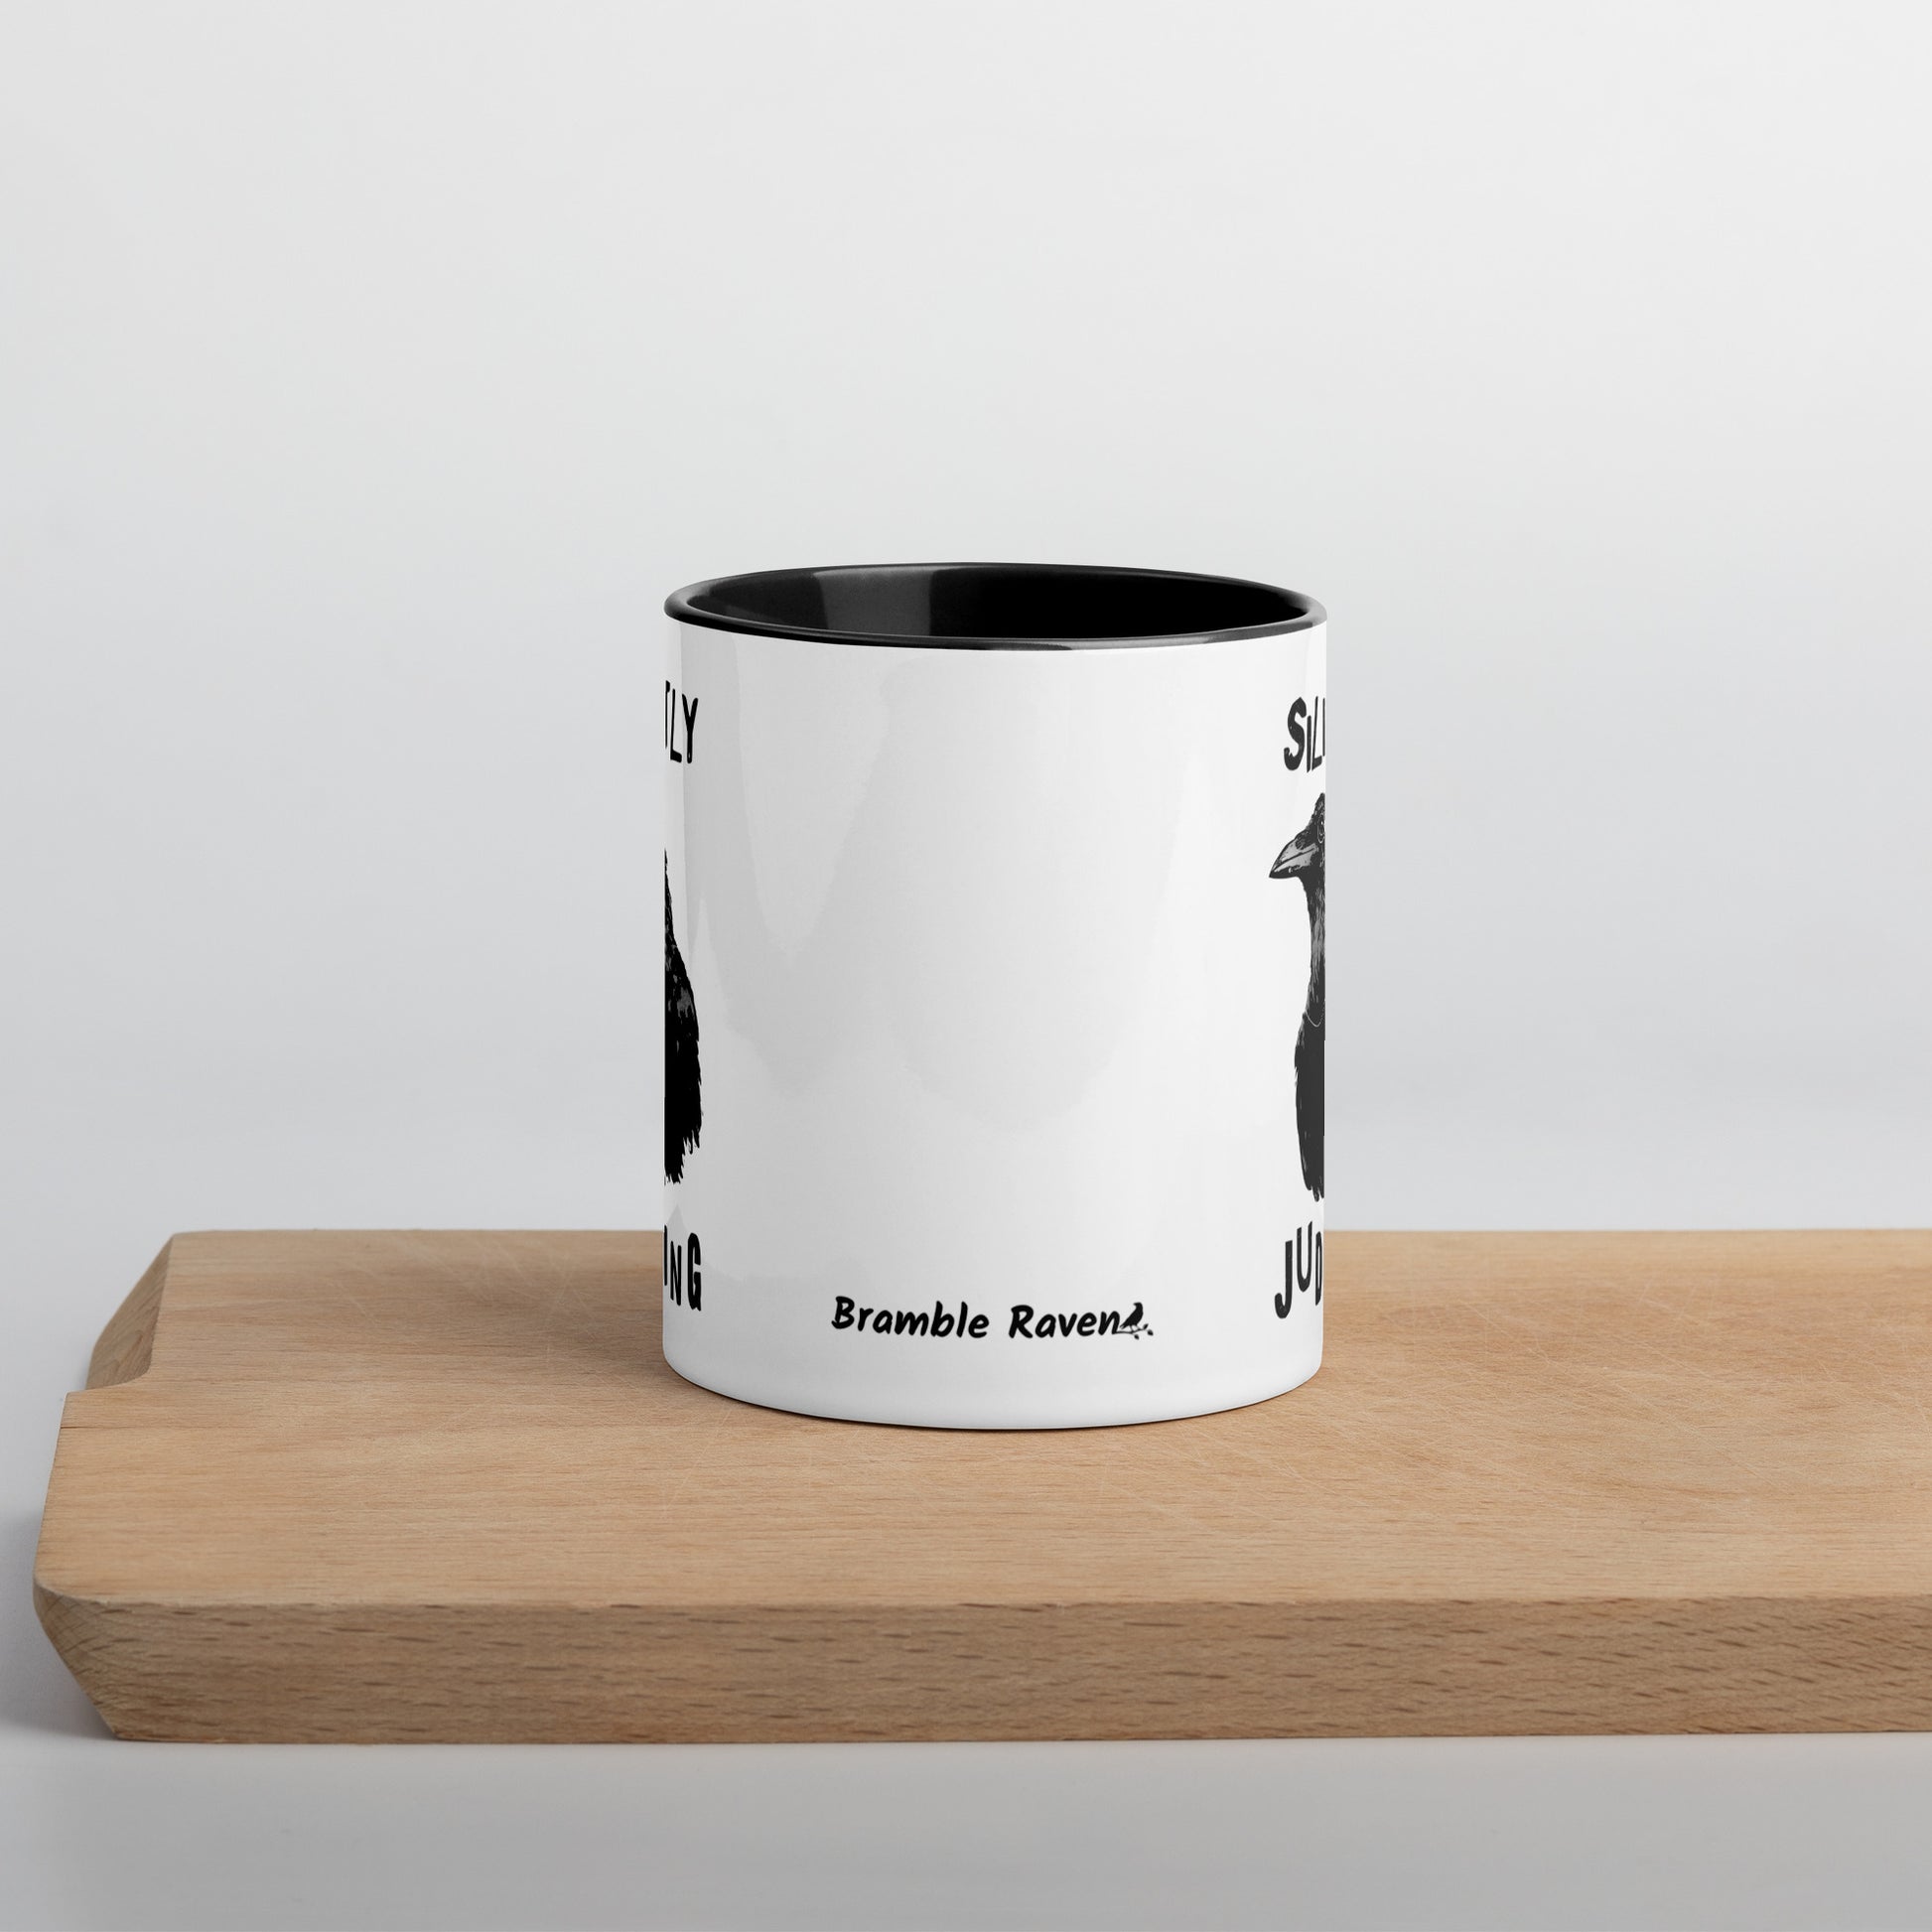 11 ounce ceramic mug with Silently Judging text surrounding a monacle-wearing crow. Double-sided design. Mug has black rim, handle, and inside. Front of mug shown sitting on wooden cutting board.